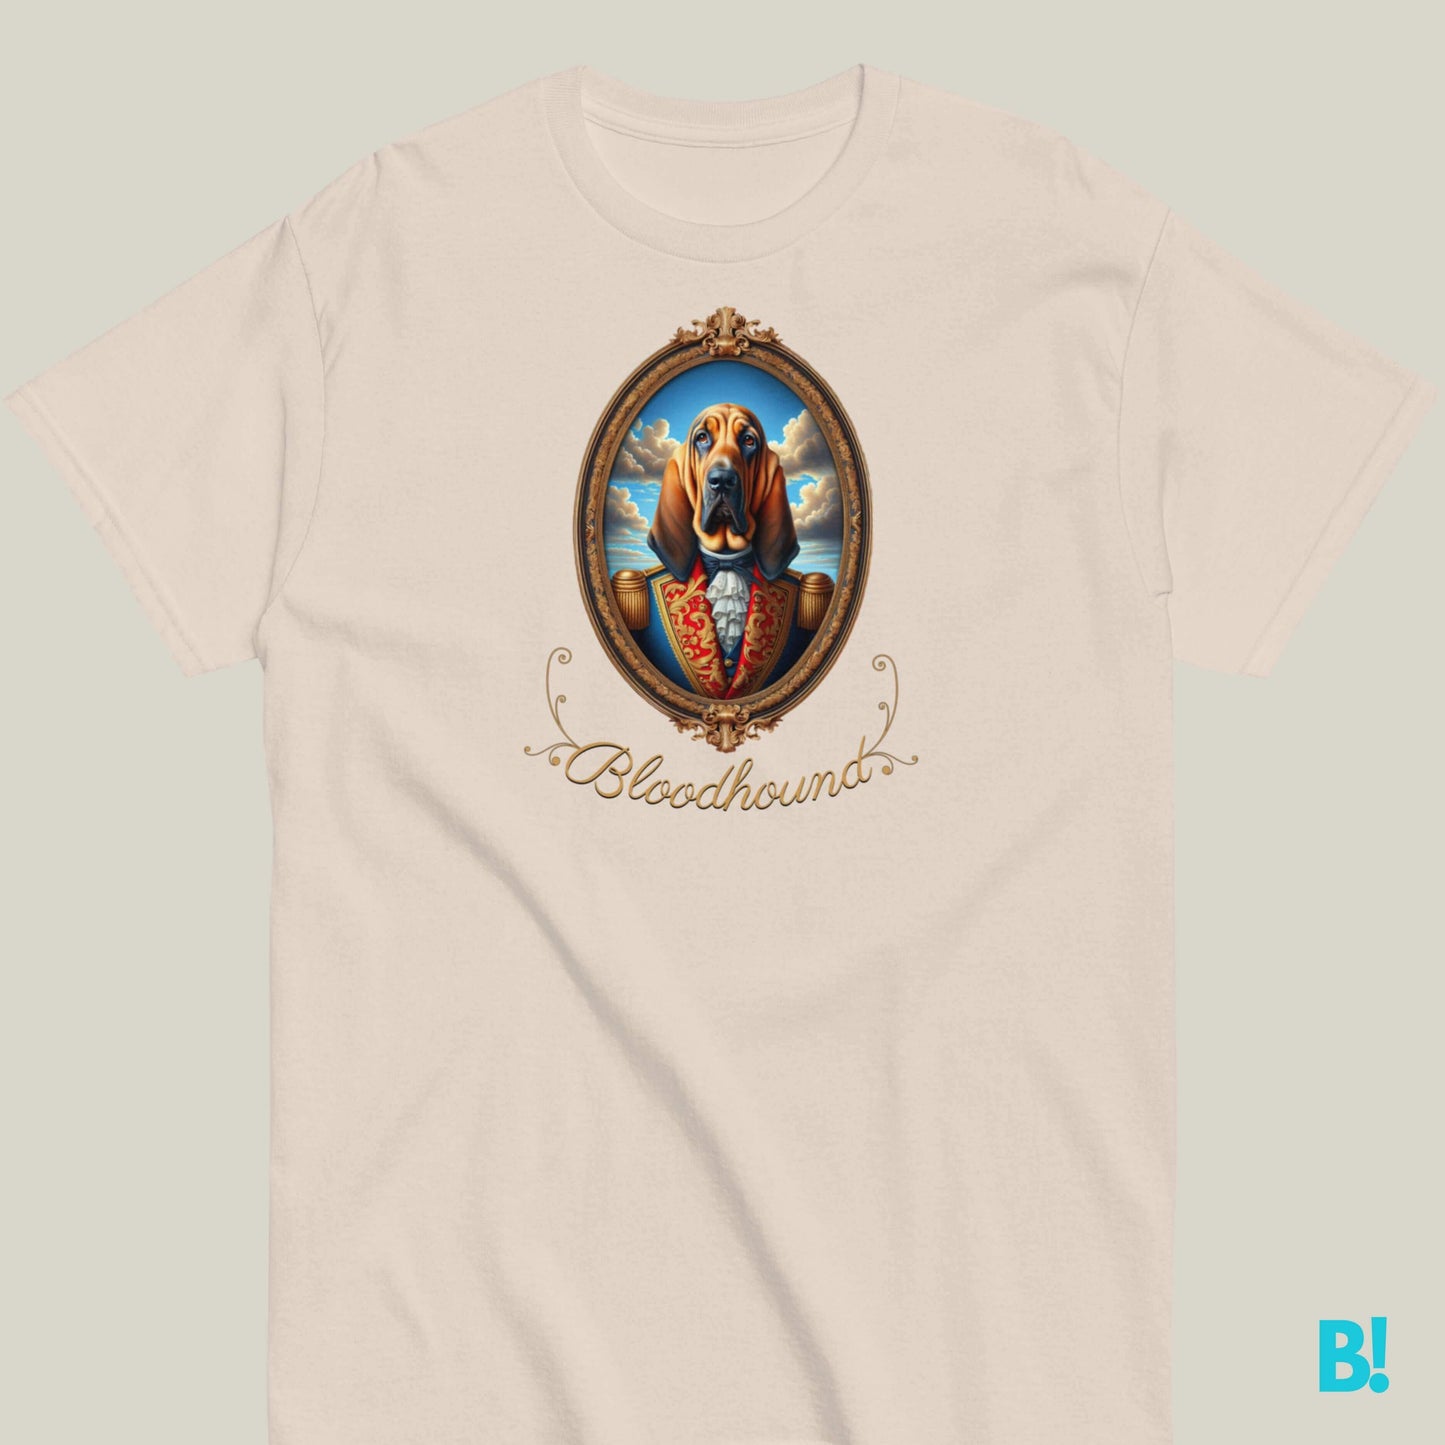 Elegant Bloodhound Portrait Tee | Unisex & Royal Colors Capture nobility with our Bloodhound Portrait Tee. Enjoy 100% cotton comfort in 7 royal colors. Perfect fit with our Size Guide! €29.50 B!NKY Comfywear